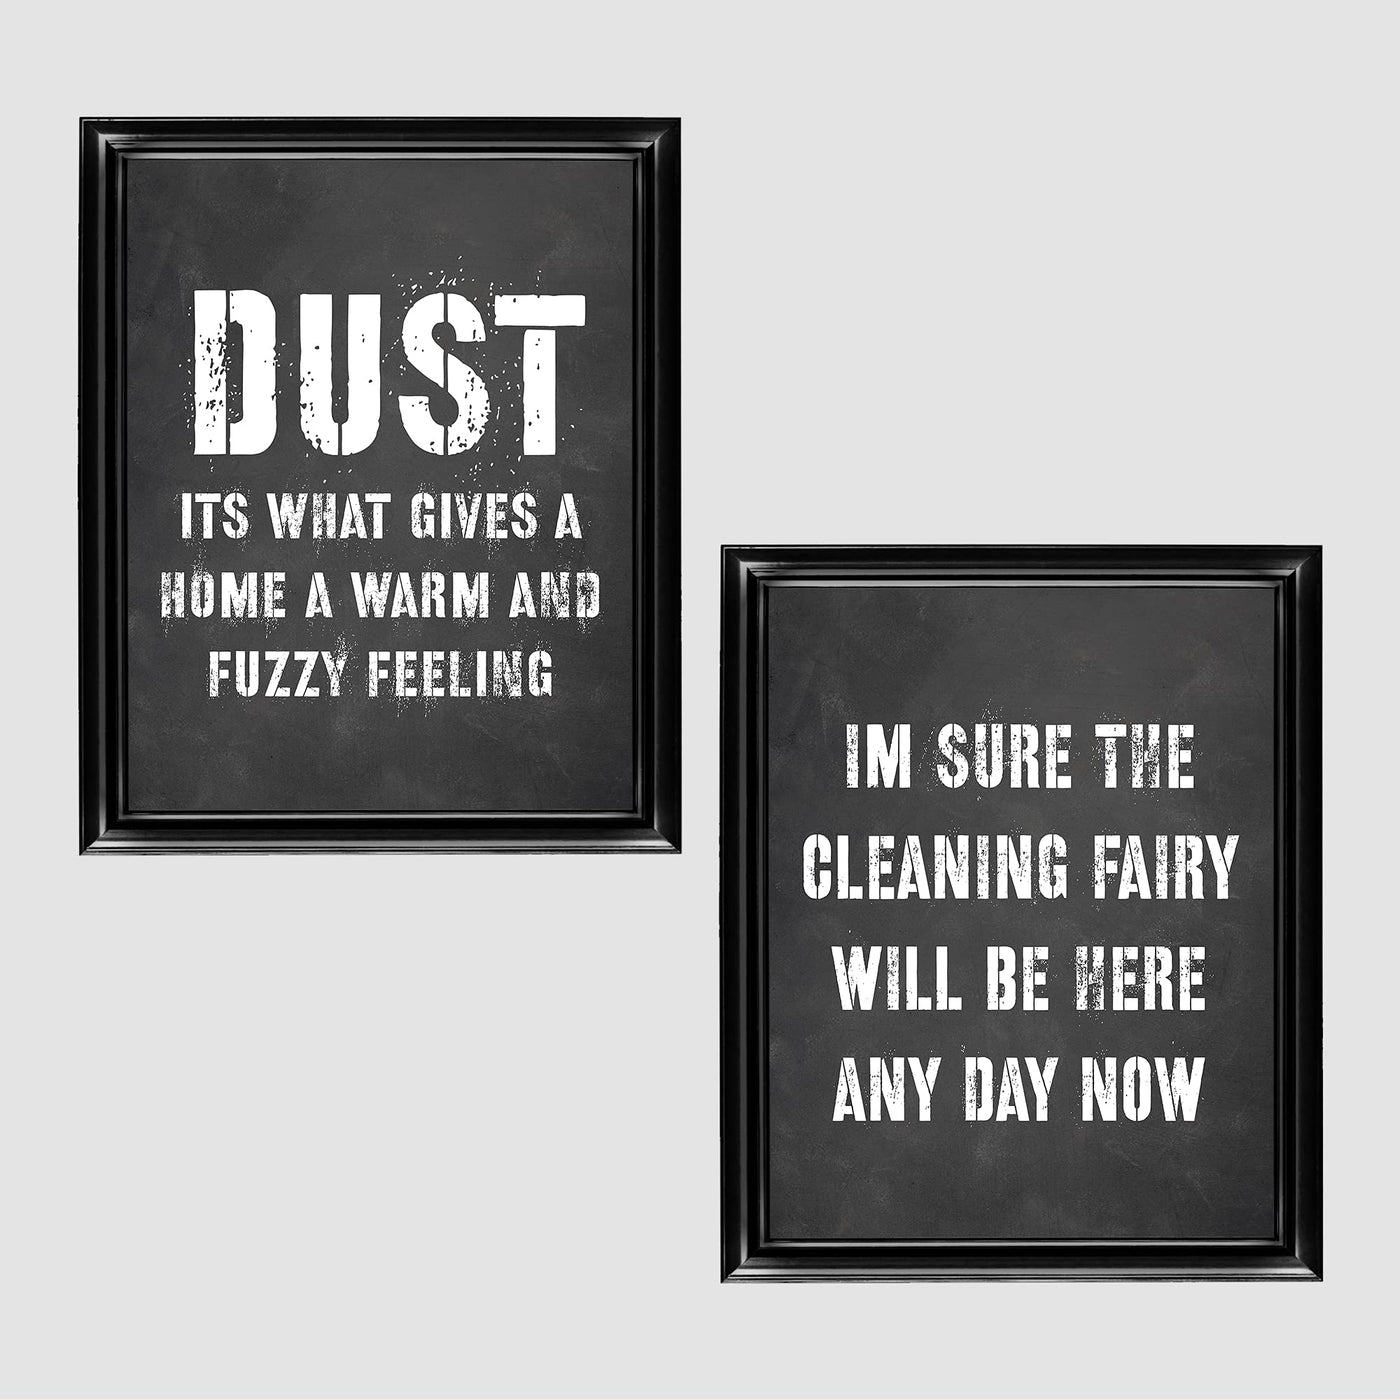 Cleaning Fairy -Set of (2)-8x10" Funny Wall Art Prints-"Dust-Gives Home Warm Fuzzy Feeling" Humorous House Cleaning Prints-Ready to Frame. Home-Office-Guest-Cabin Decor. Fun Housewarming Gift!